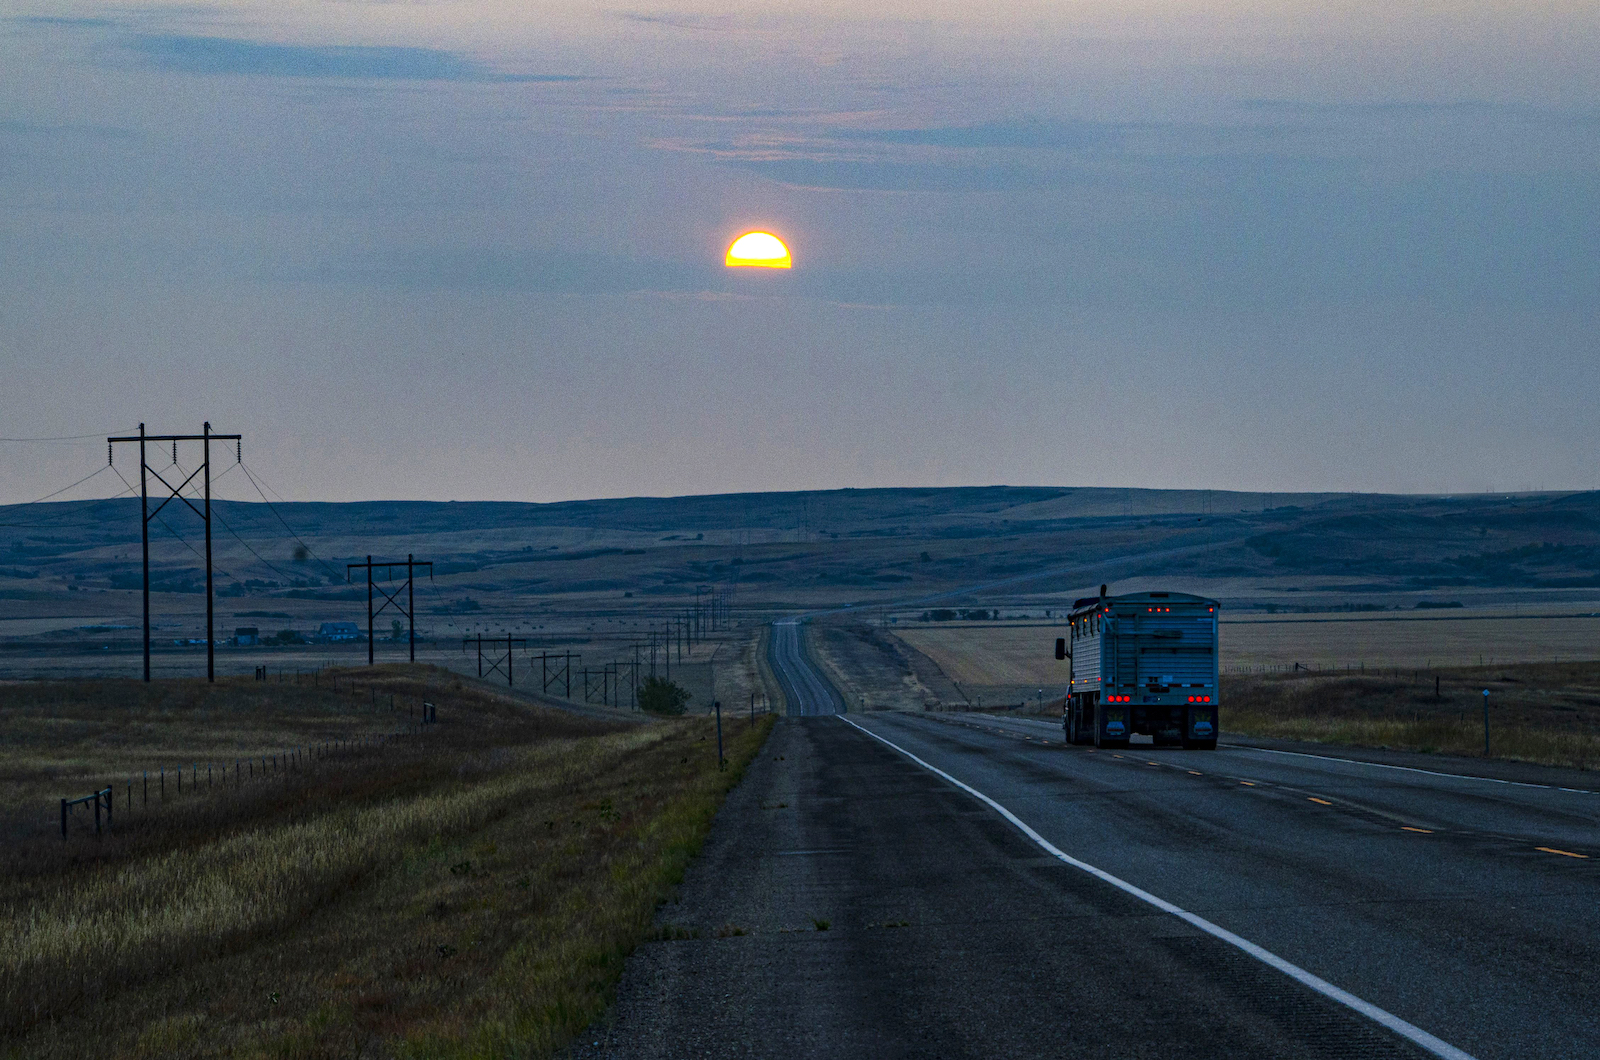 Wildfire smoke obscures the sunrise near Wolf Point, Fort Peck Indian Reservation, Montana. Wolf Point’s community “rural capacity” score is 52/100, lower than the state median of 58.